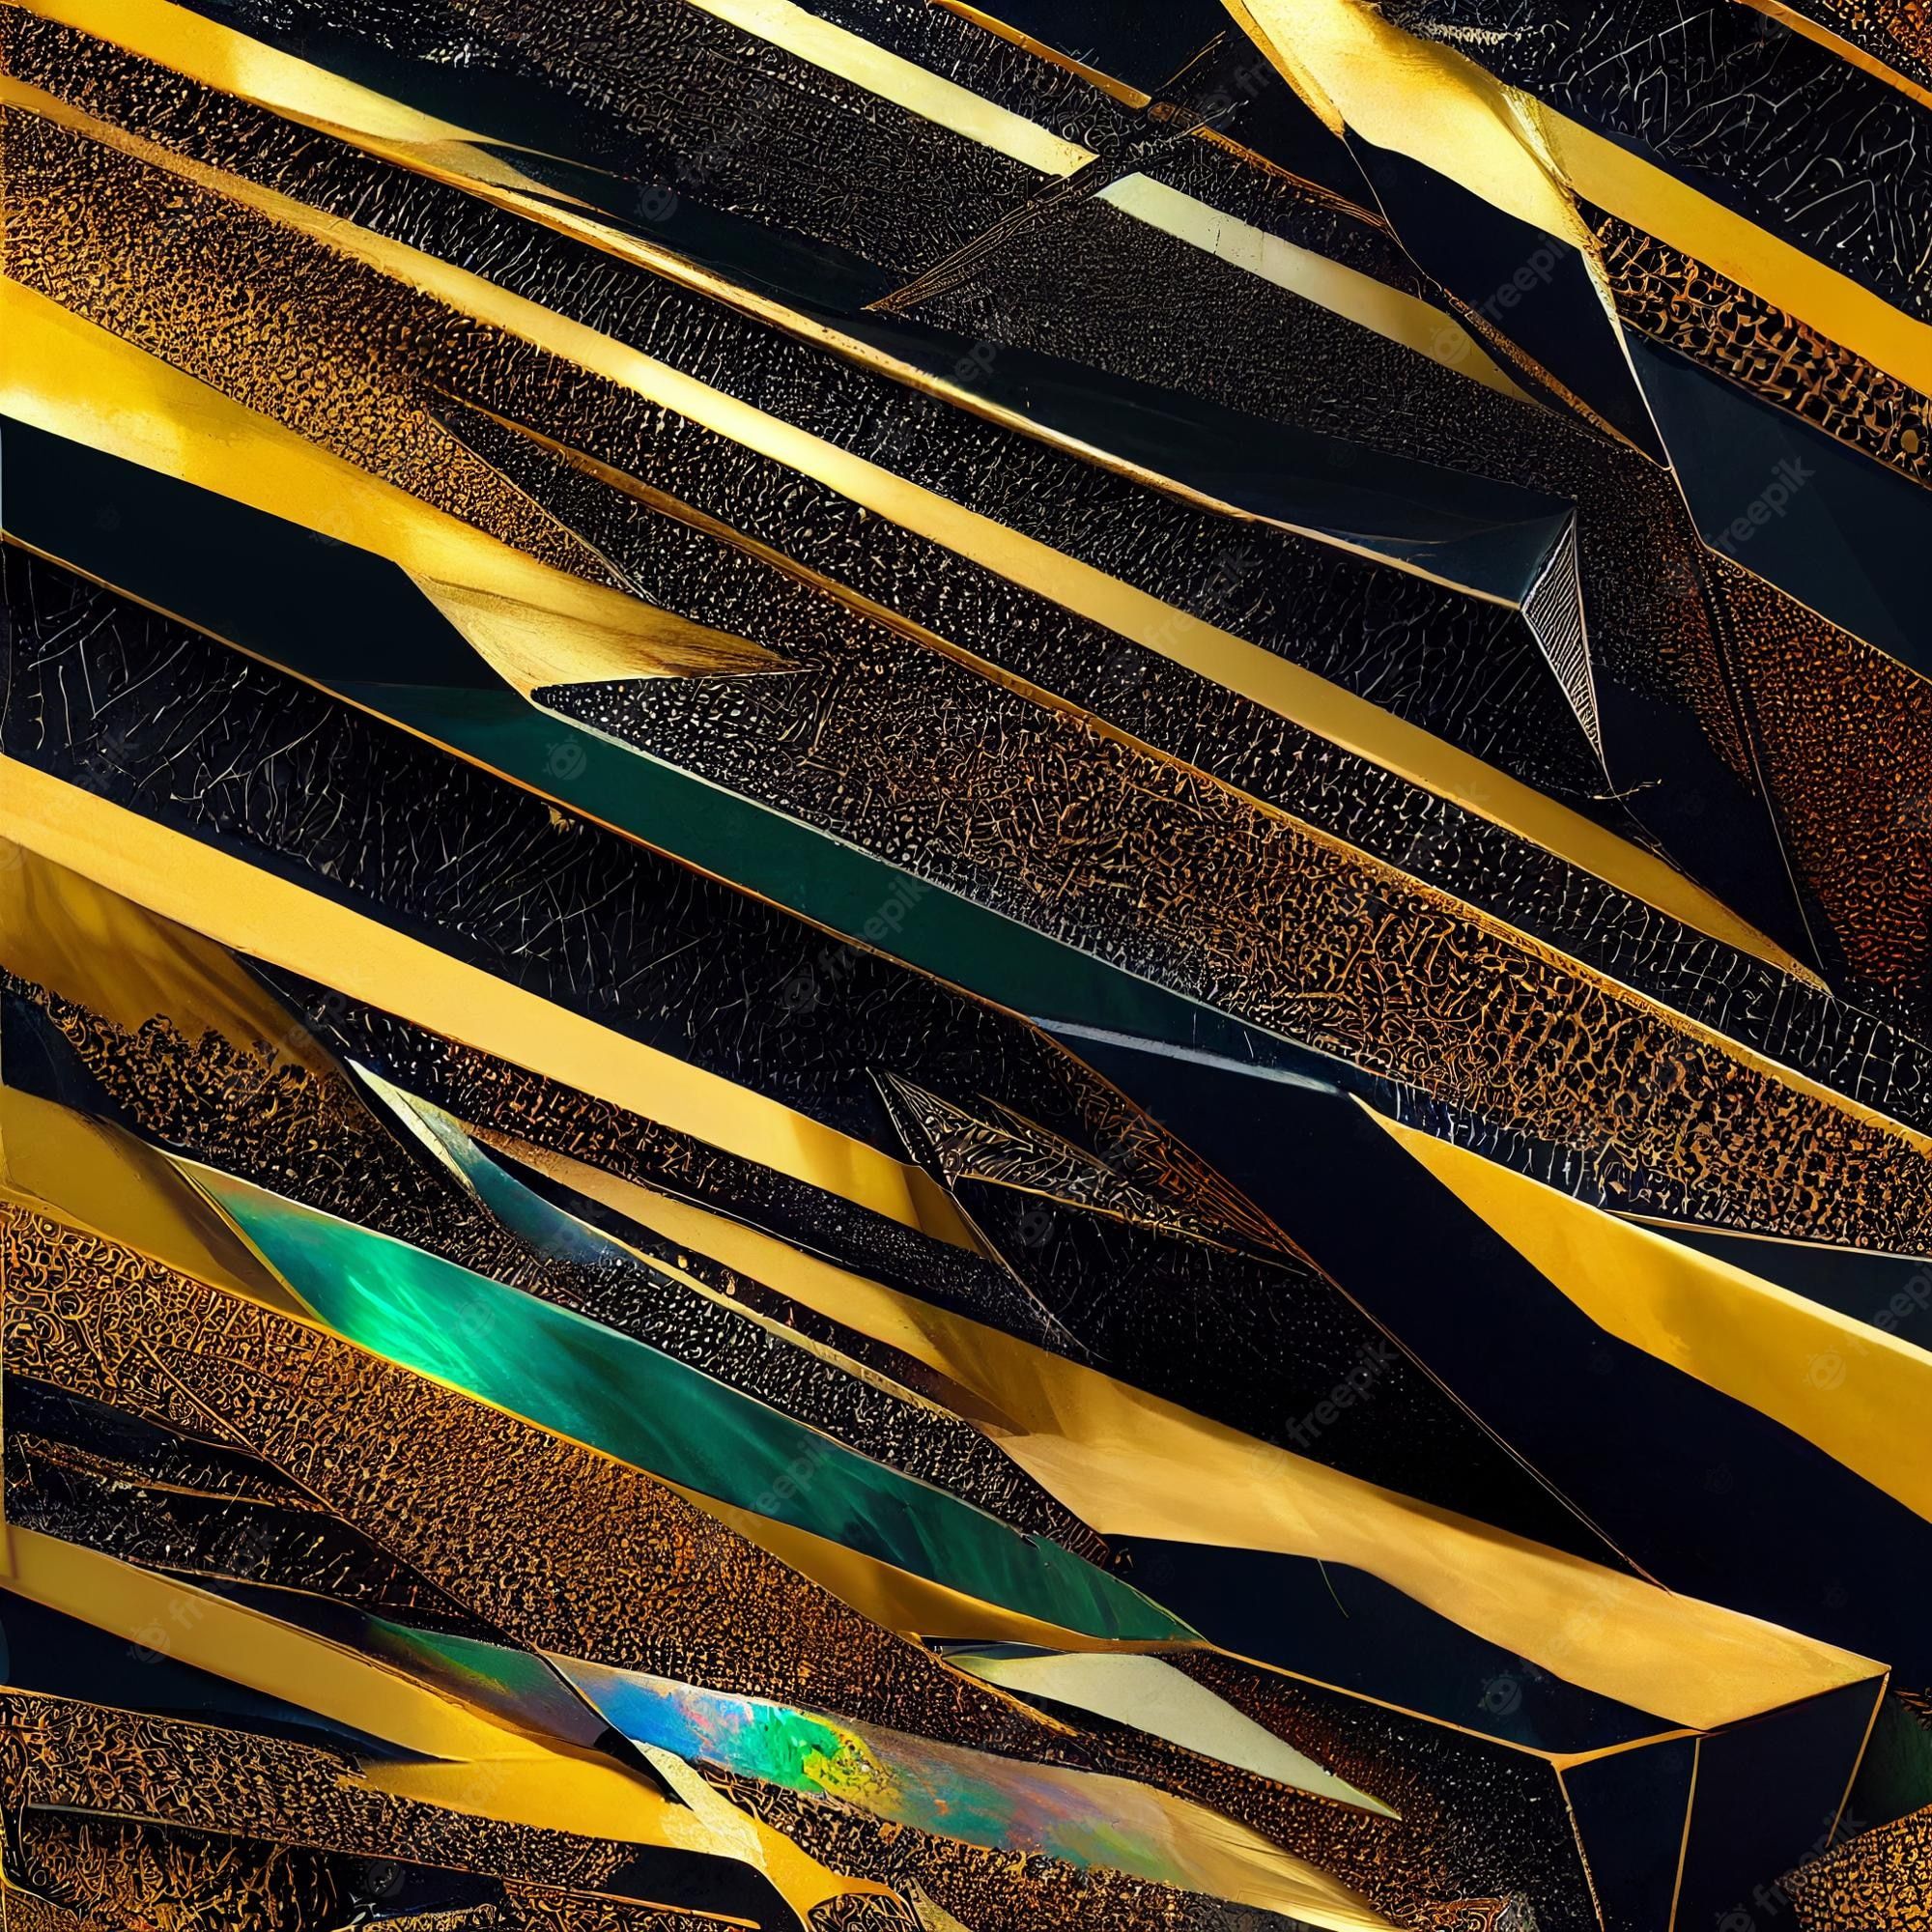  4k Gaming Hintergrundbild 2000x2000. Premium Photo. Abstract background colorful gaming wallpaper with sharp edges 3D rendering